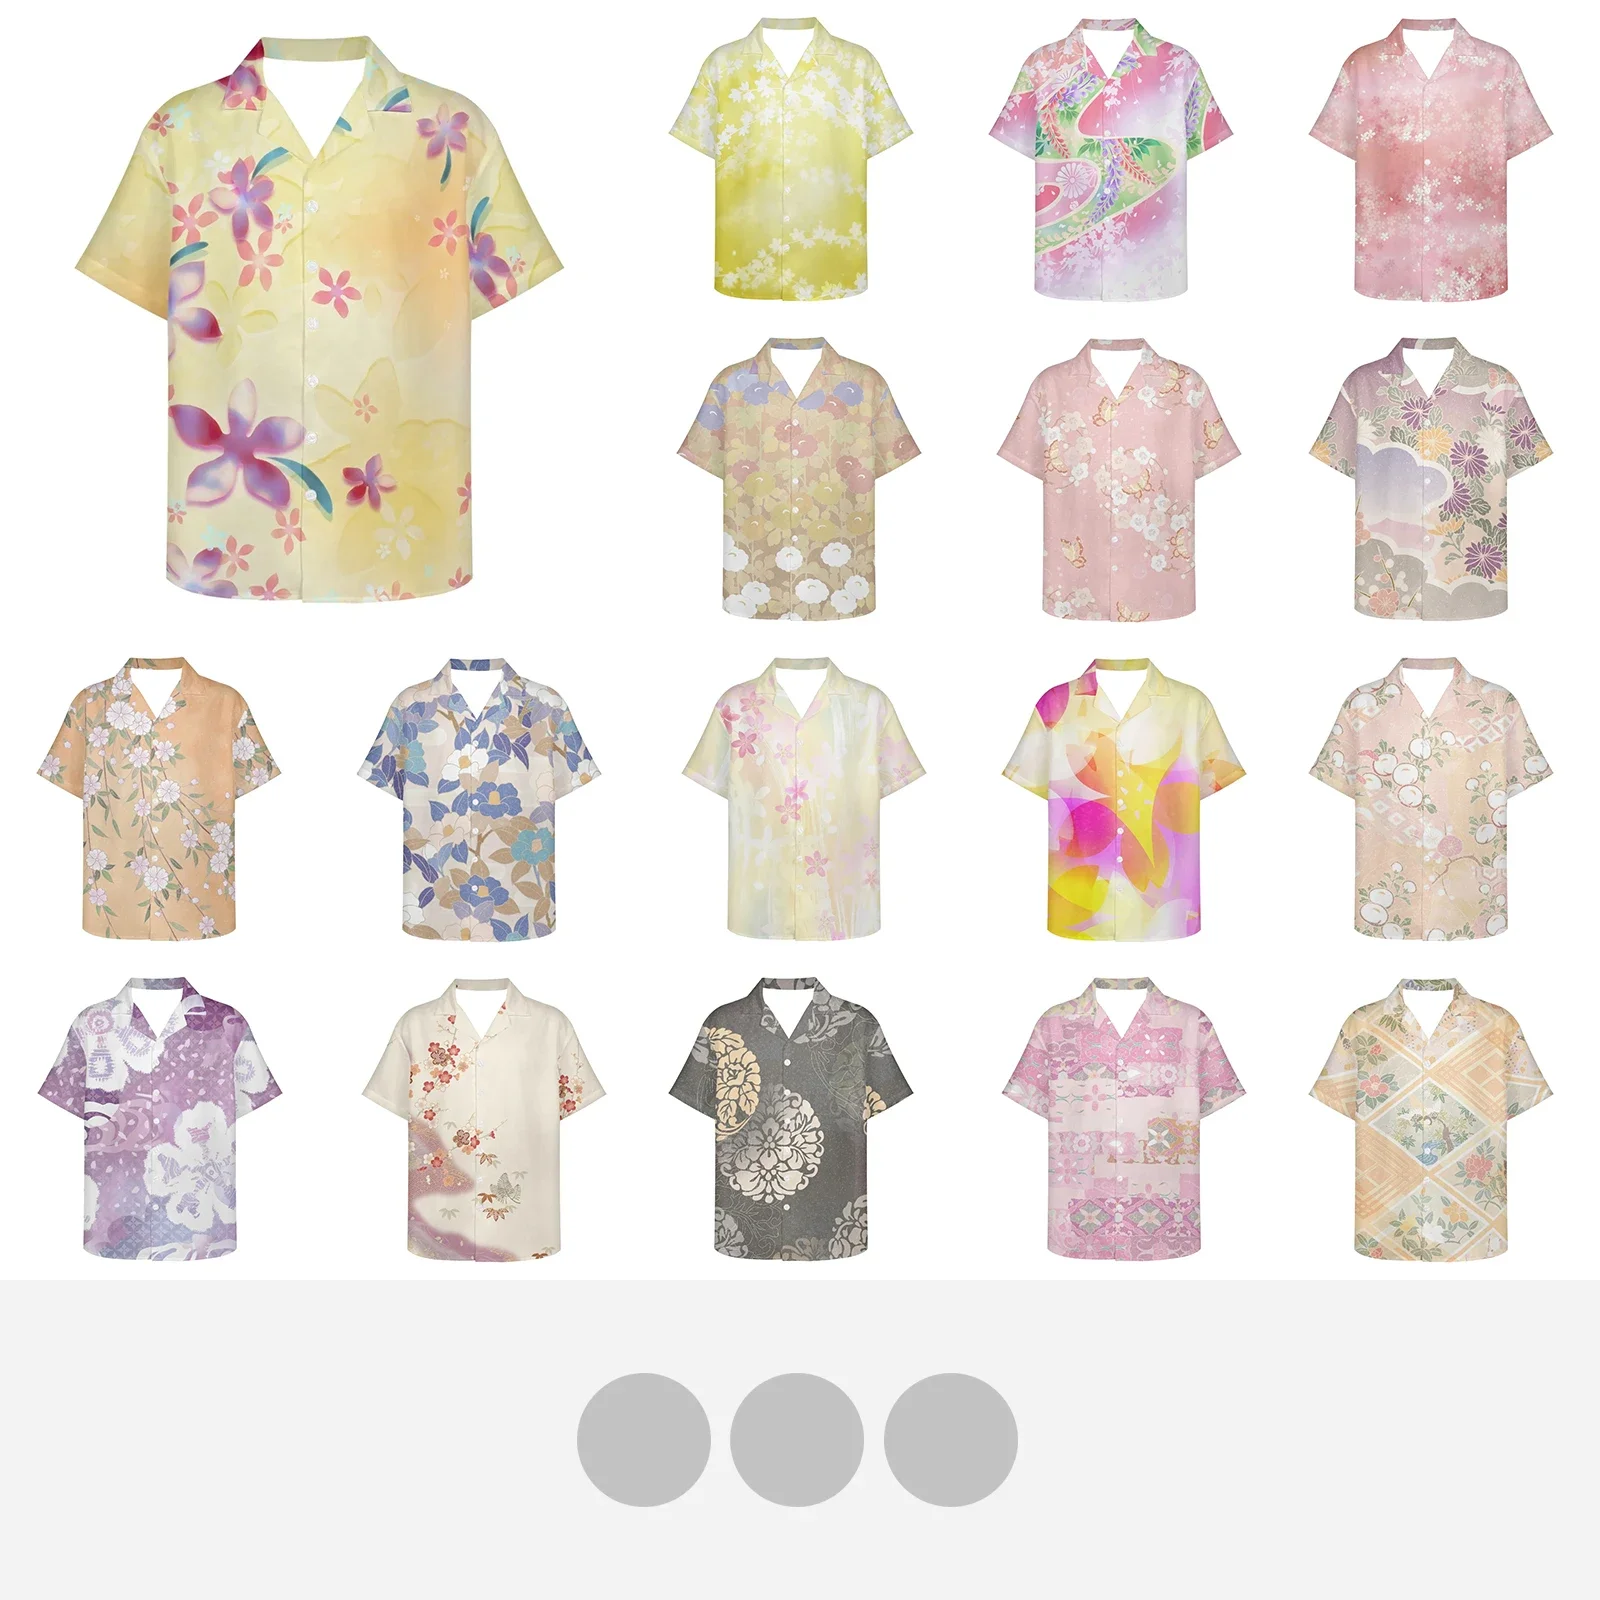 

Japanese Animation Style Clothes Cherry Blossom Shirt For Photographing Hawaiian Aloha Shirt Men Beach Tops Button Clothing